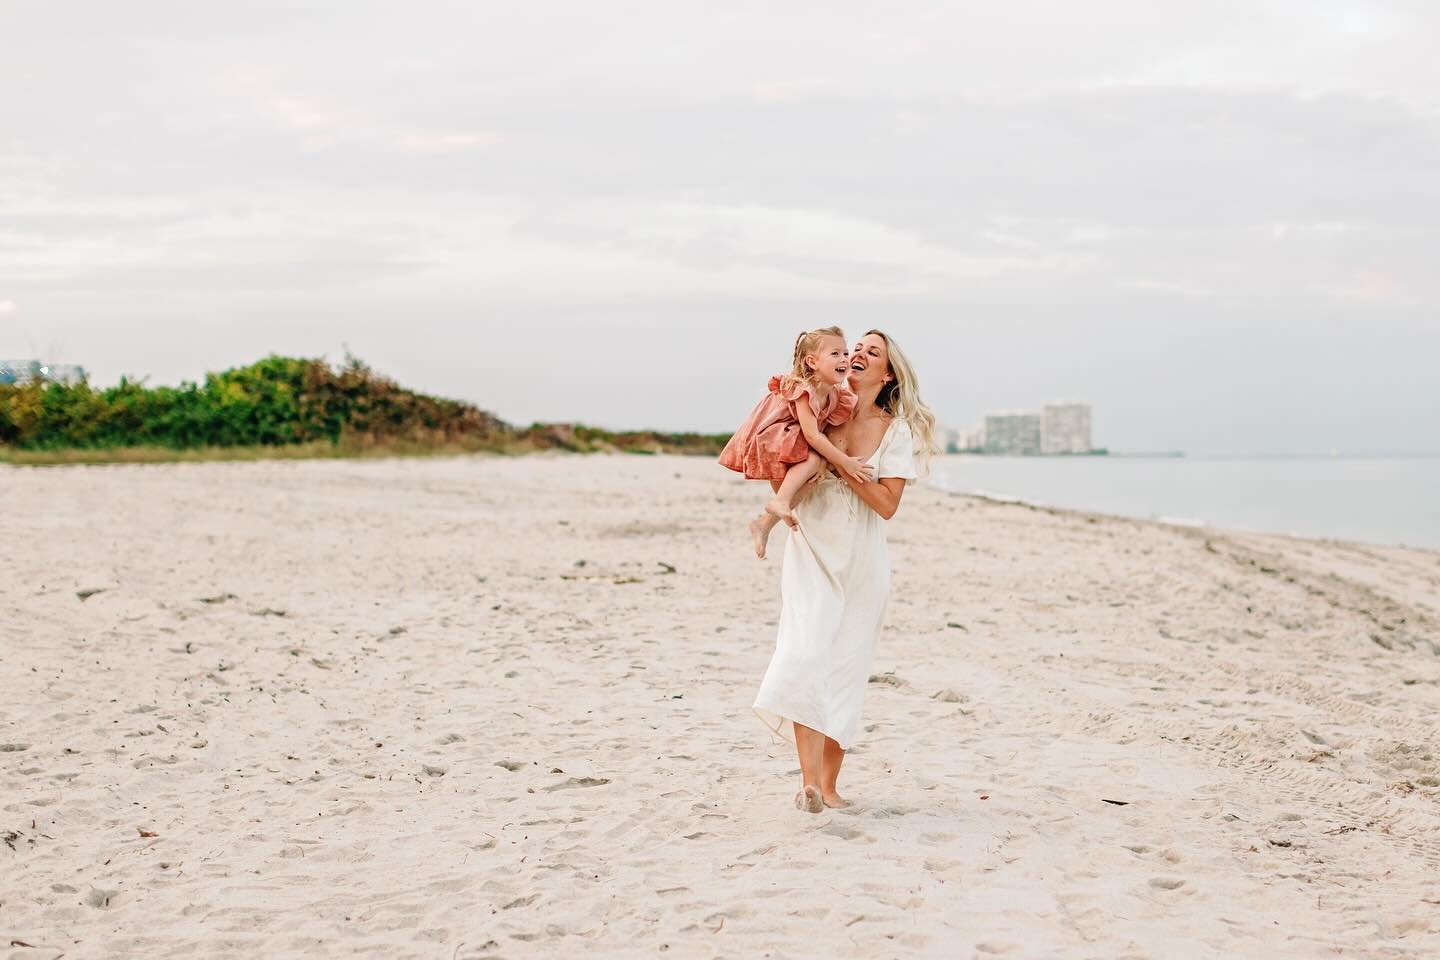 Can you believe we have already breezed through the first day of Spring?! 
Feels like yesterday we were just welcoming the new year! 🙃 #capturingthemoment
.
.
.
.
.
.
.
.
.
.

.
. #lifestylephotography #delraybeachphotographer #palmbeachphotographer